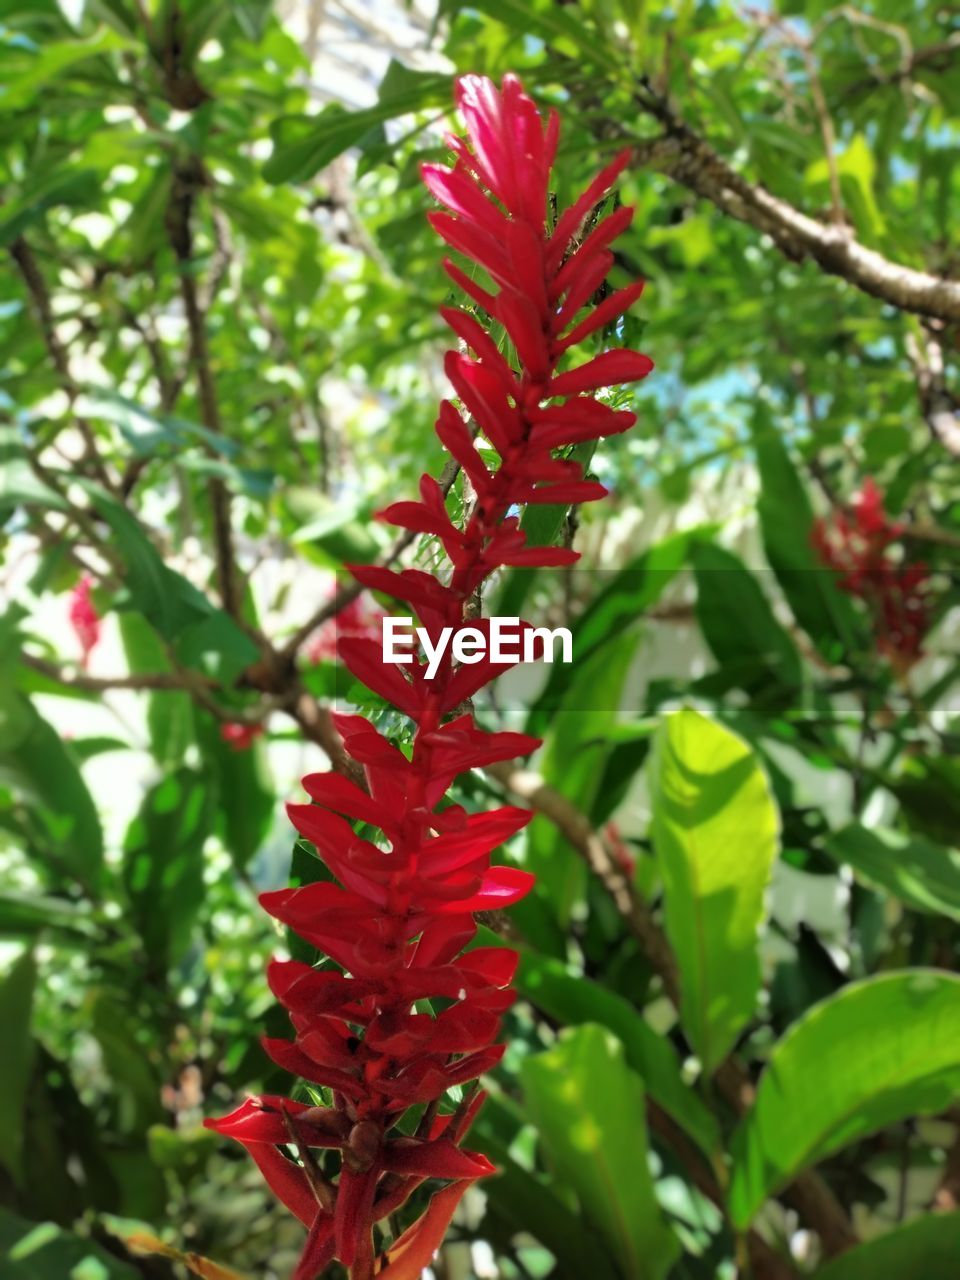 plant, leaf, plant part, red, tree, flower, growth, nature, beauty in nature, branch, green, no people, shrub, close-up, focus on foreground, day, outdoors, flowering plant, freshness